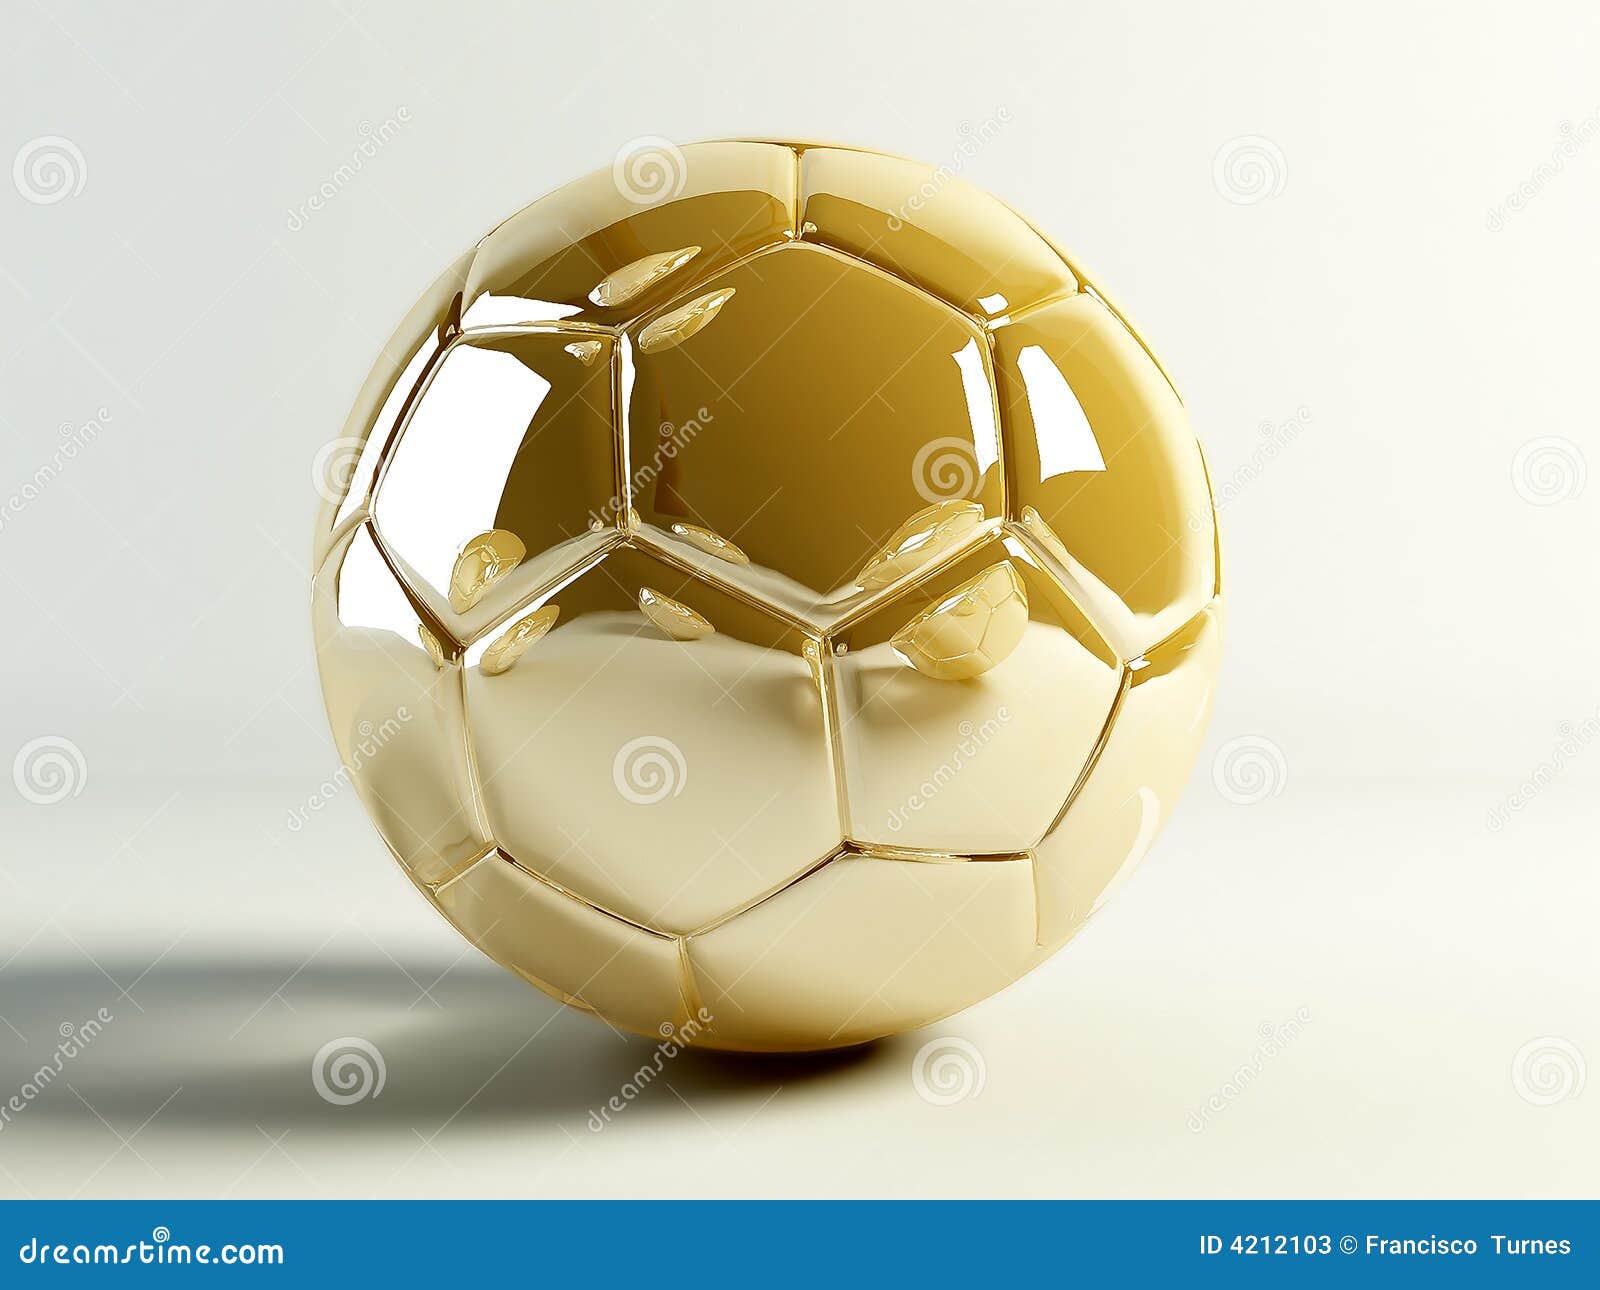 Golden soccerball stock image. Image of force, globe, play - 4212103